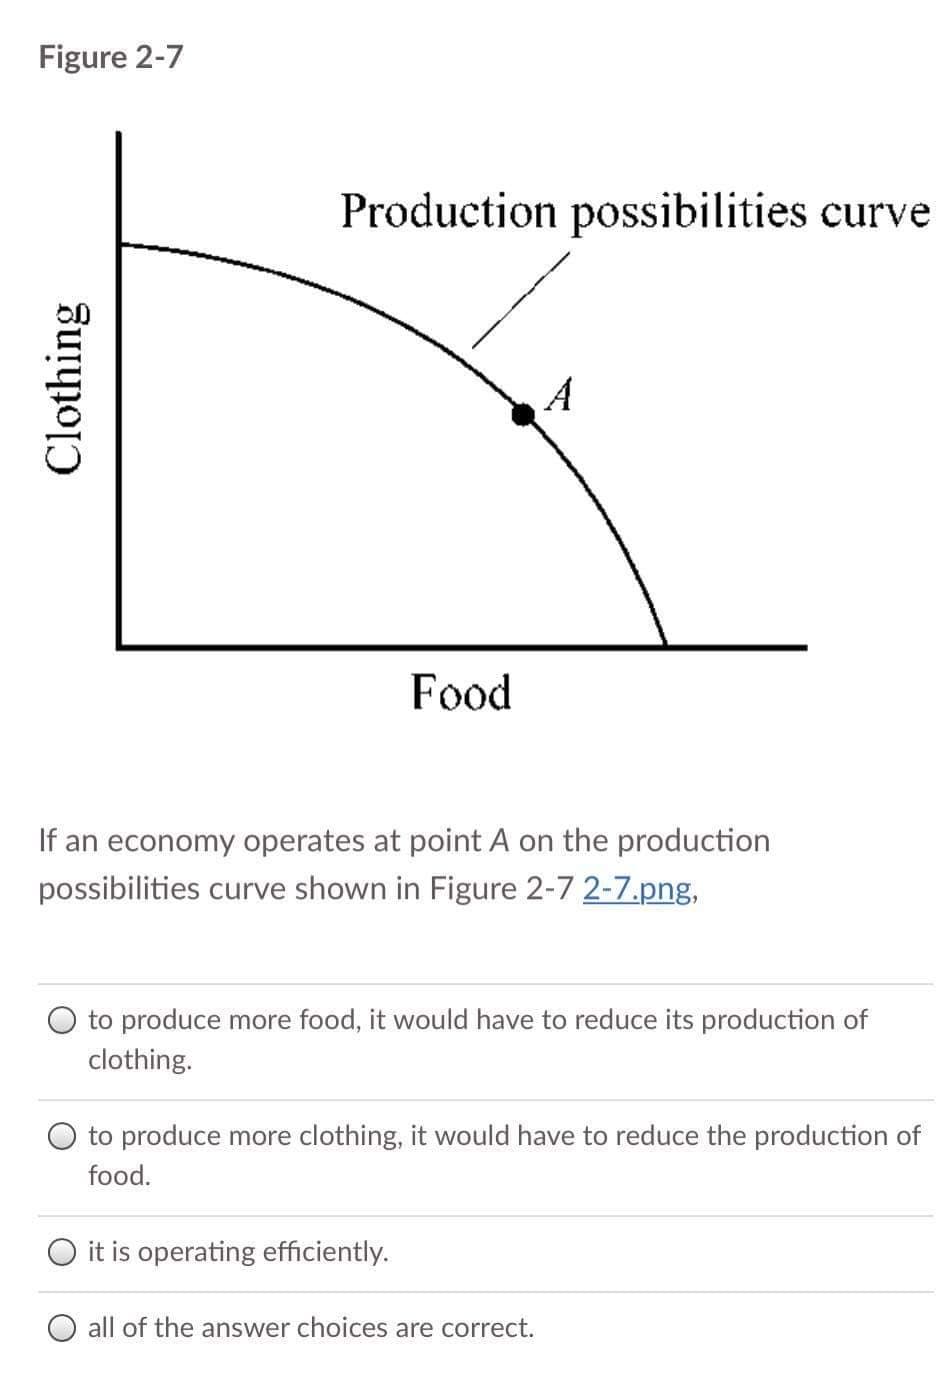 Figure 2-7
Production possibilities curve
A
Food
If an economy operates at point A on the production
possibilities curve shown in Figure 2-7 2-7.png,
to produce more food, it would have to reduce its production of
clothing.
O to produce more clothing, it would have to reduce the production of
food.
O it is operating efficiently.
O all of the answer choices are correct.
Clothing
